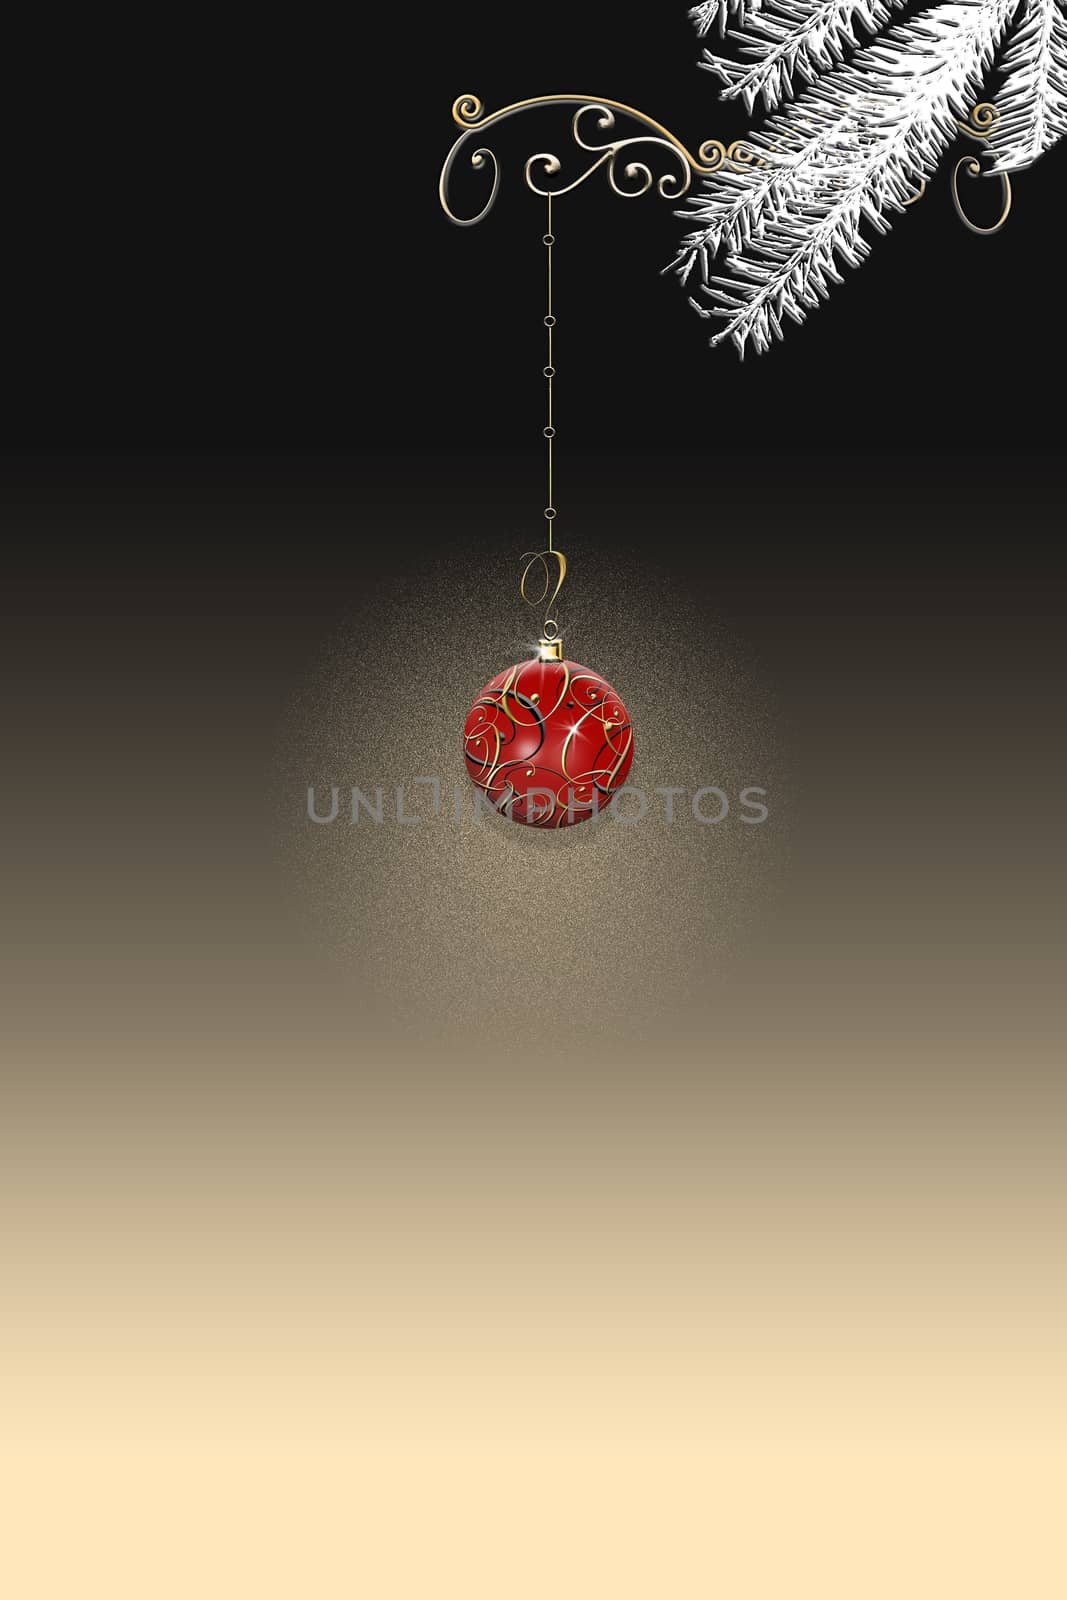 Elegant background with red Christmas balls and branch on black background by NelliPolk